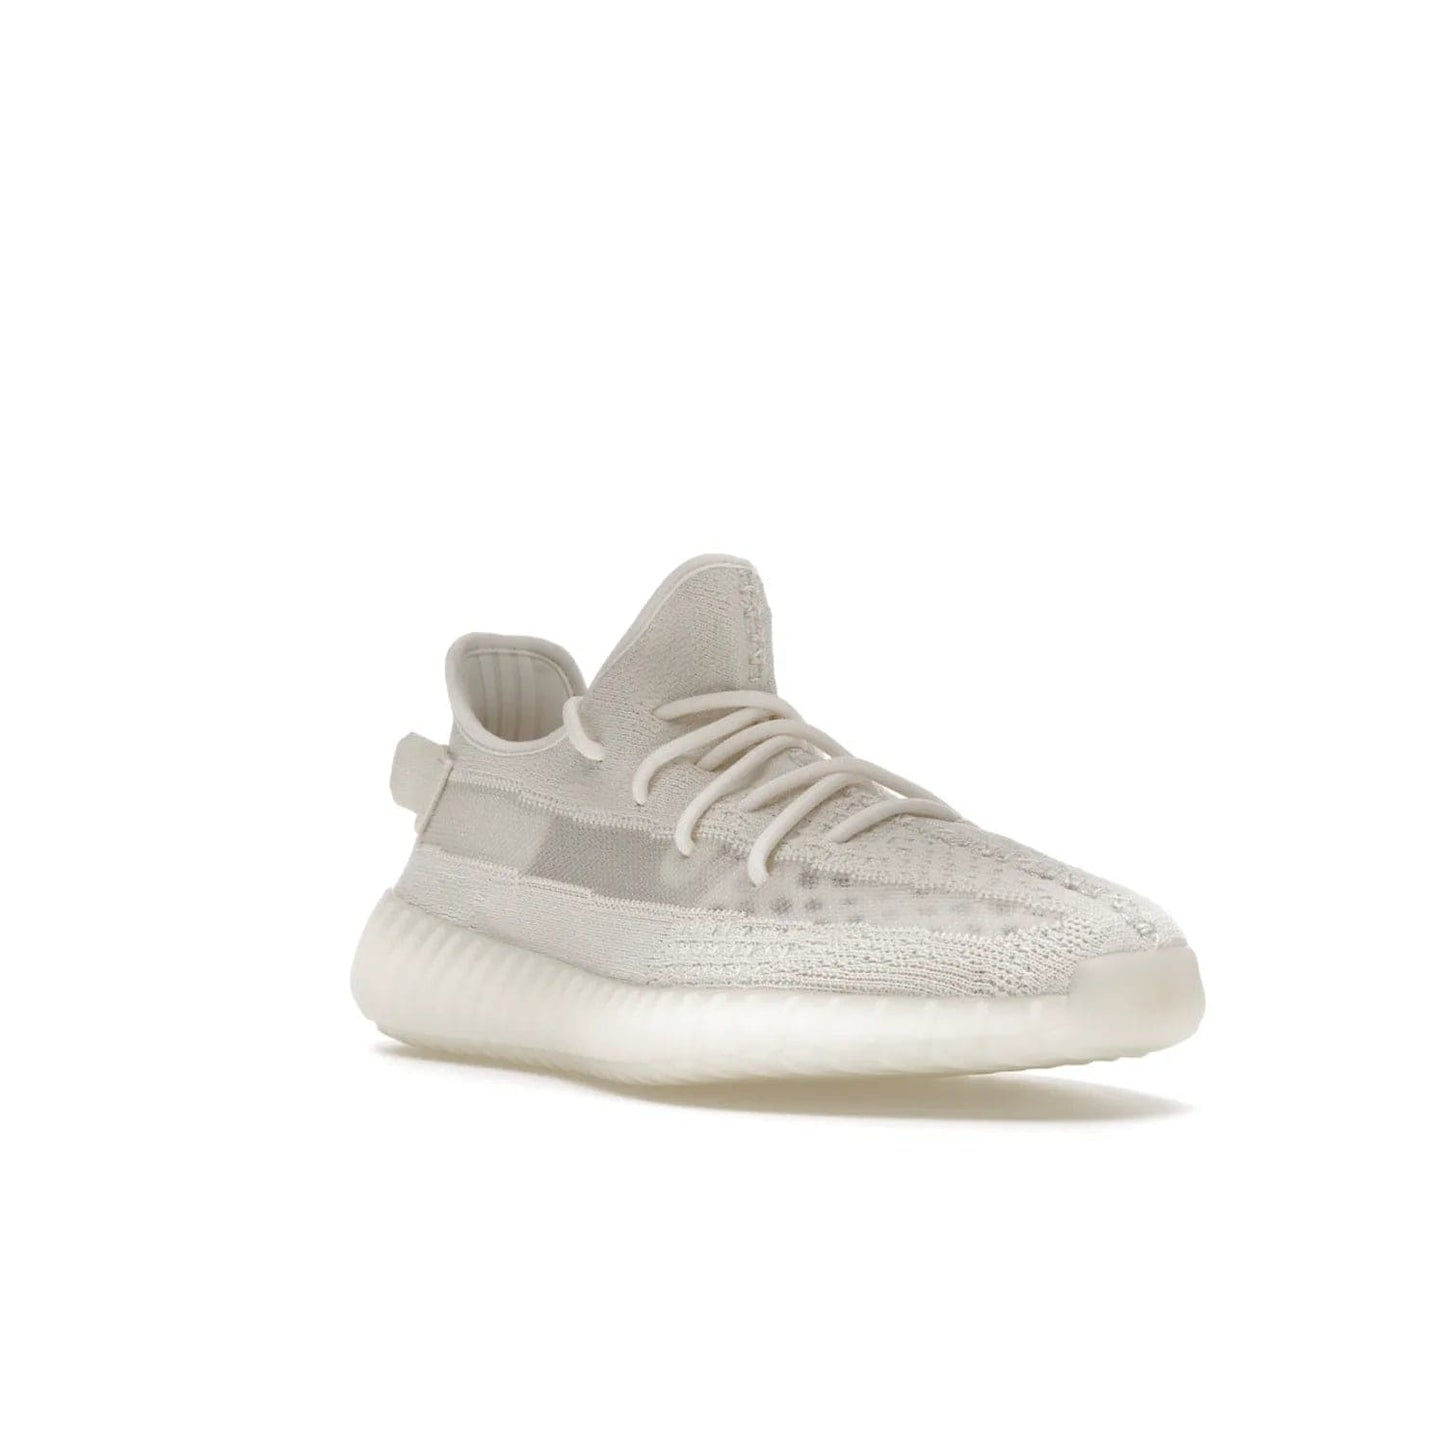 adidas Yeezy Boost 350 V2 Bone - Image 6 - Only at www.BallersClubKickz.com - Grab the stylish and comfortable adidas Yeezy Boost 350 V2 Bone in March 2022. This sneaker features a triple white Primeknit upper, mesh side stripes and canvas heel tabs, sitting atop a semi-translucent sole with Boost technology. Sure to keep your feet comfortable and stylish!